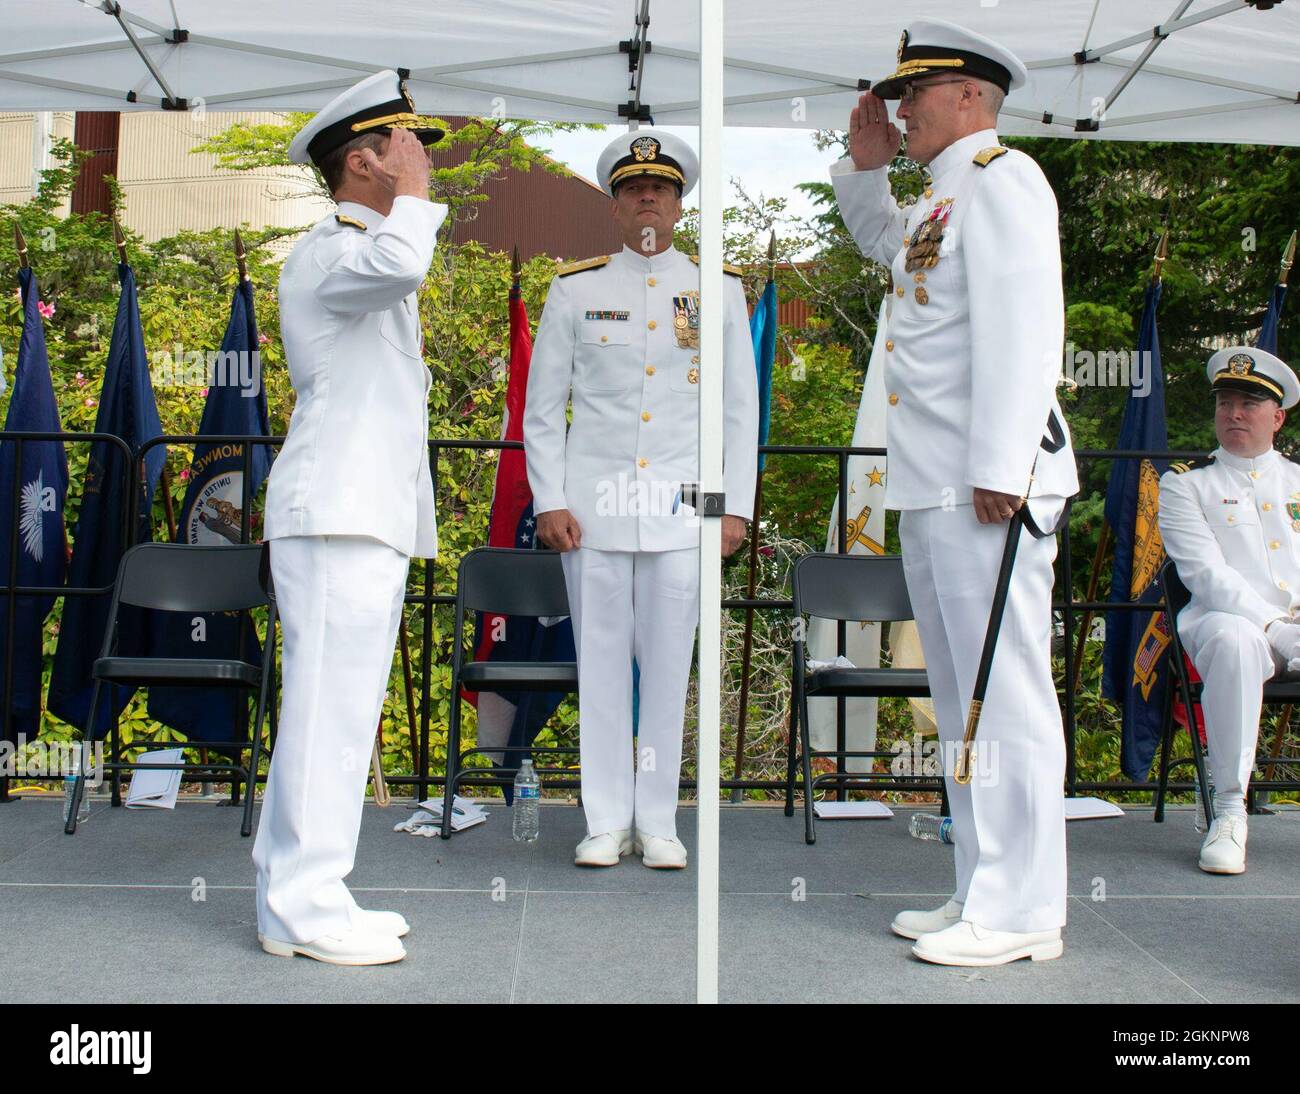 SILVERDALE, Wash. - Rear Adm. Douglas Perry, left, is relieved by Rear Adm. Robert Gaucher, right, as commander of Submarine Group 9 in a change of command ceremony held at Deterrent Park, Naval Base Kitsap-Bangor, June 8. Subordinate to Commander, Submarine Force, U.S. Pacific Fleet, COMSUBGRU- 9 exercises administrative, tactical and operational command and control authority for assigned Trident fleet ballistic and cruise missile submarines and subordinate commands and units in the Pacific Northwest. Subordinate commands include Submarine Squadrons 17 and 19, and Naval Submarine Support Cent Stock Photo